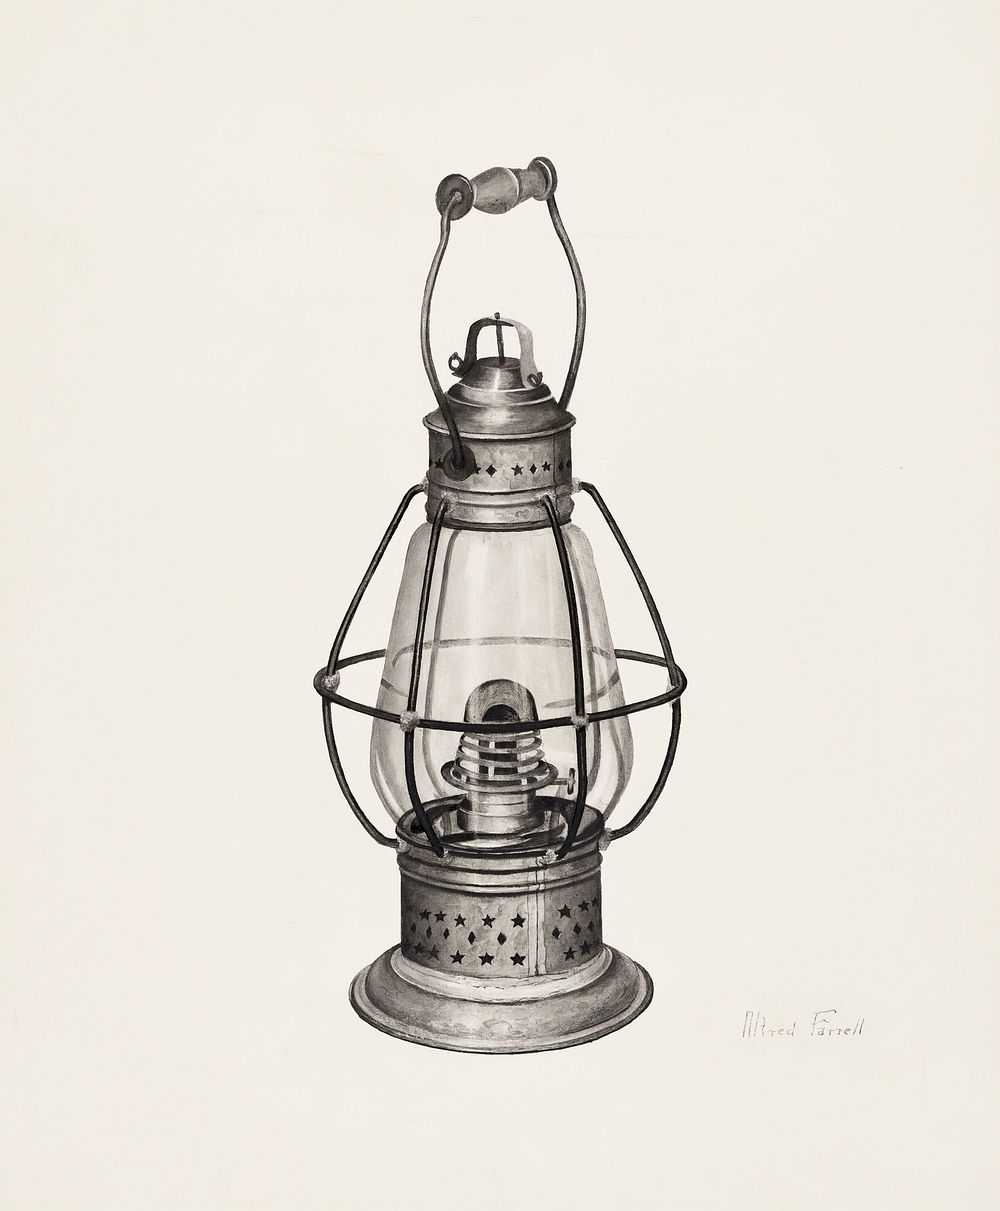 Coal Oil Lantern (ca. 1939) by Alfred Farrell. Original from The National Gallery of Art. Digitally enhanced by rawpixel.